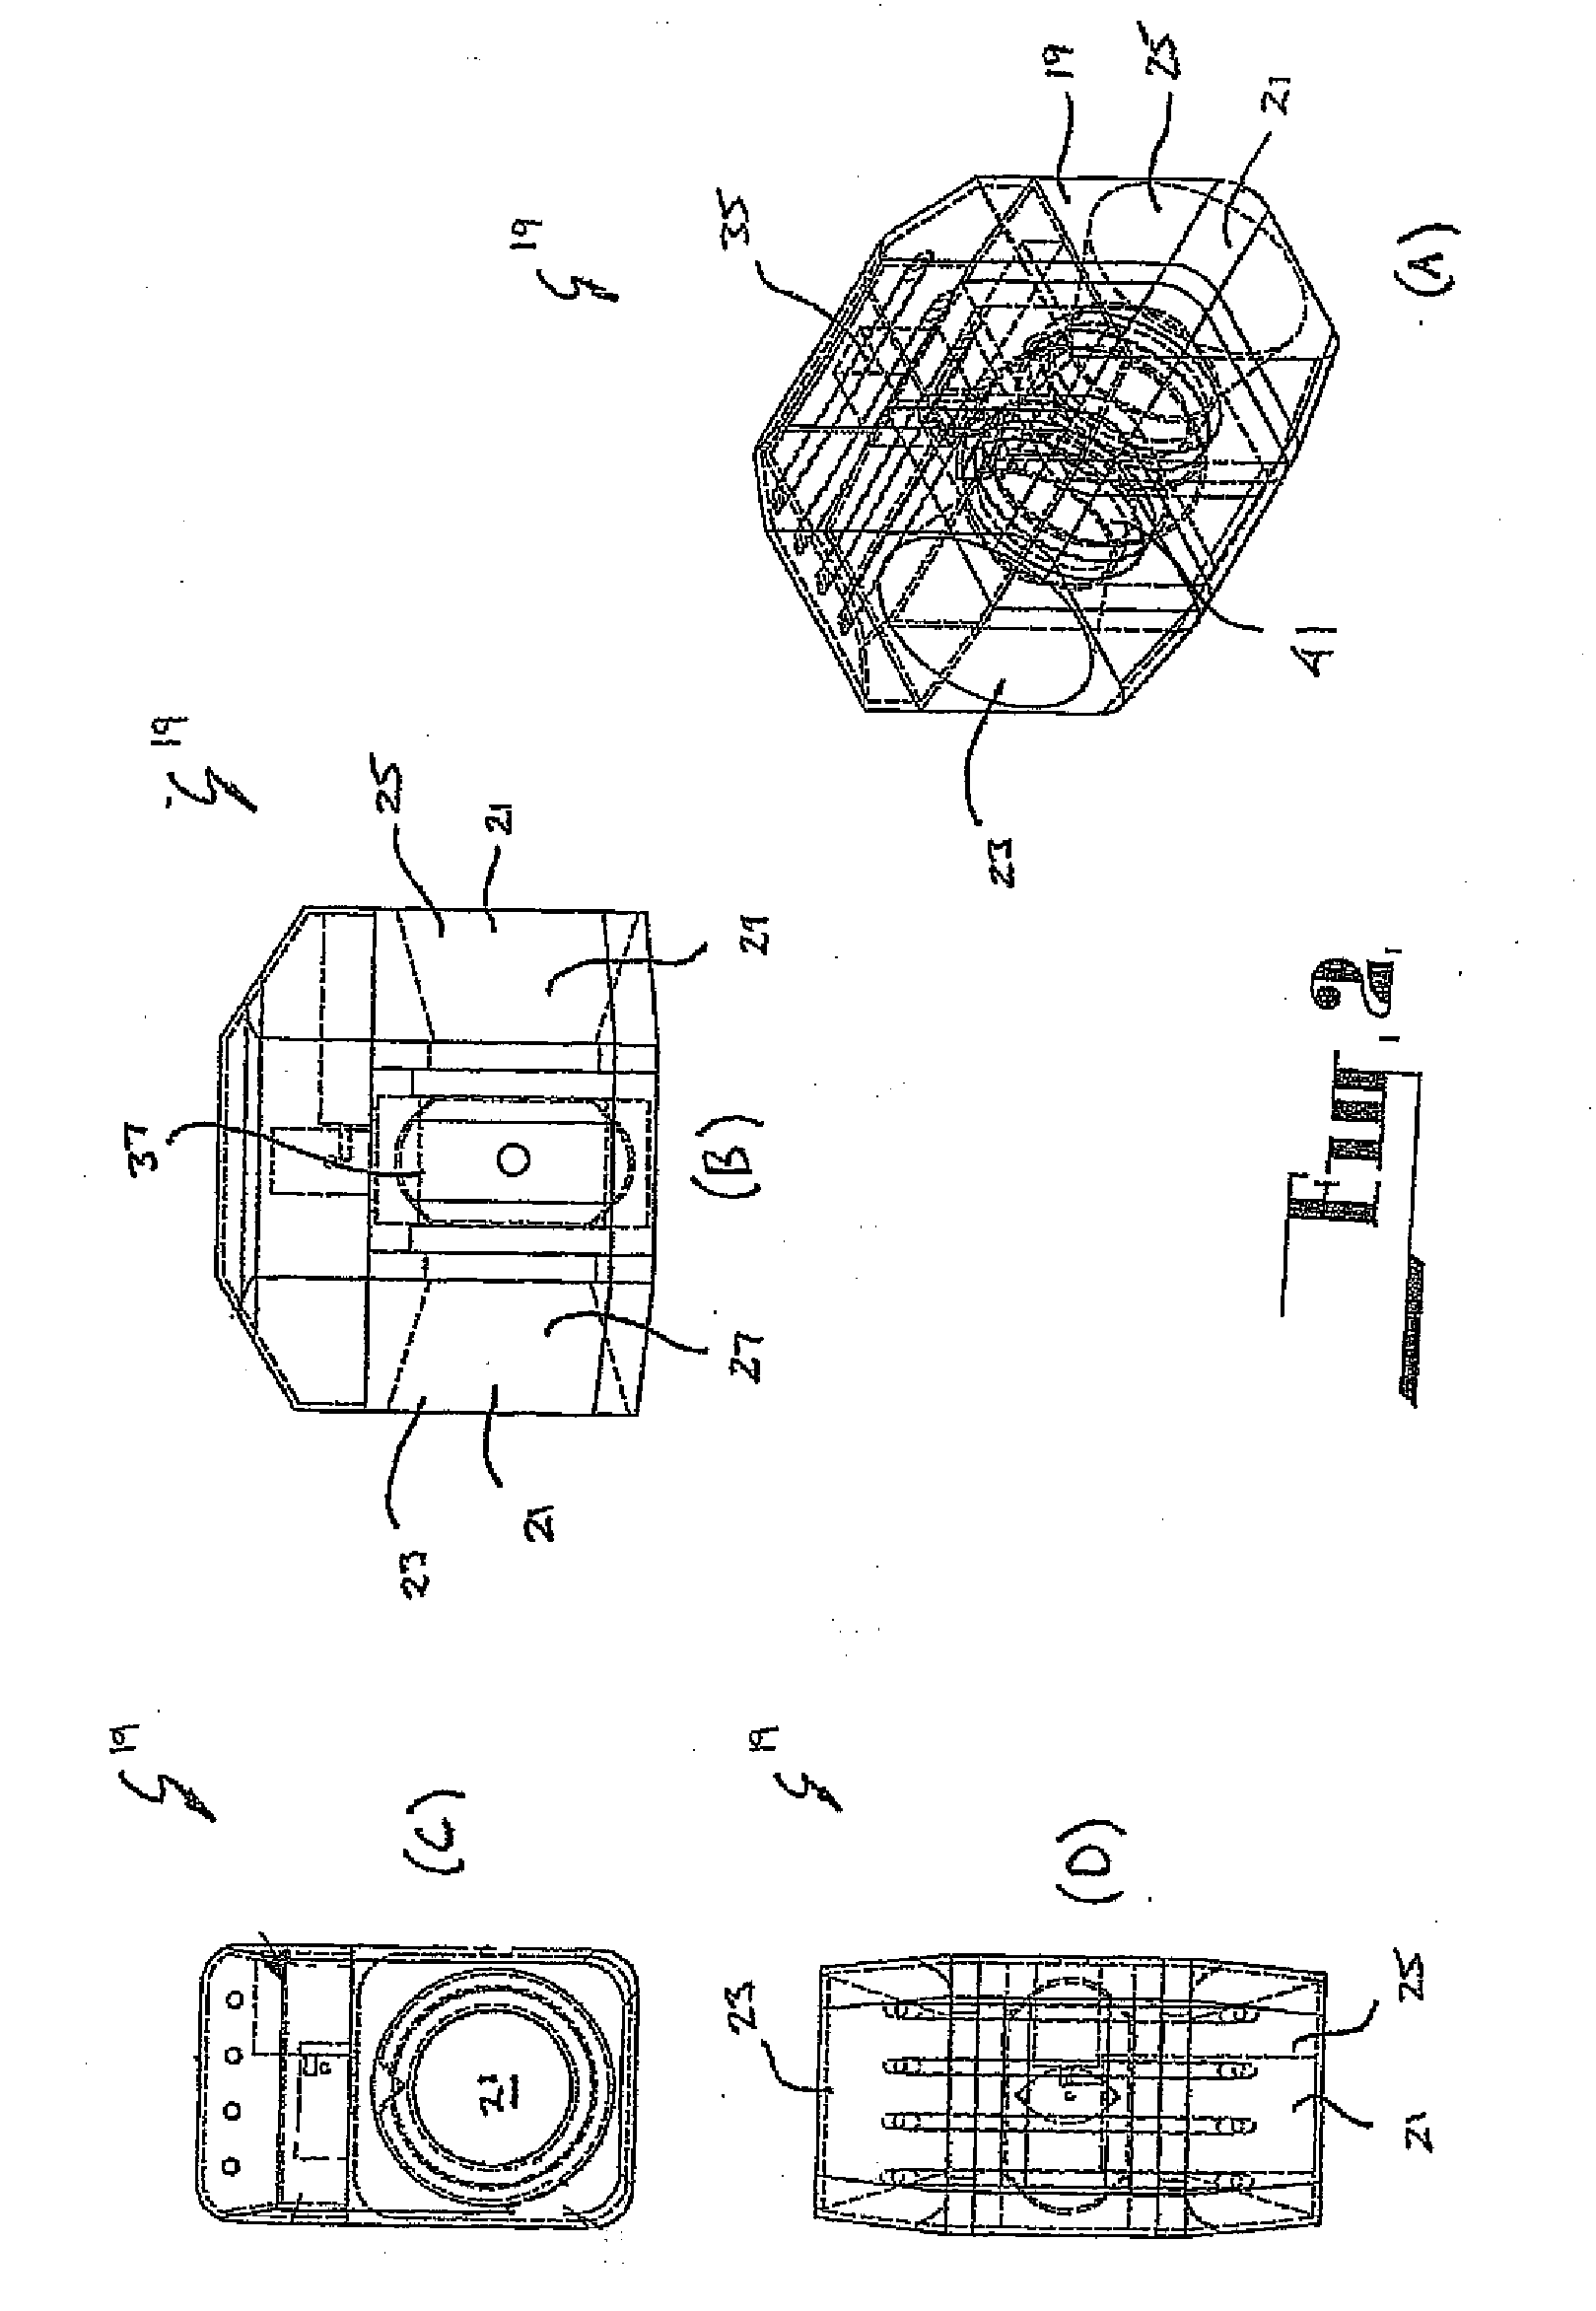 Turbine unit and assembly